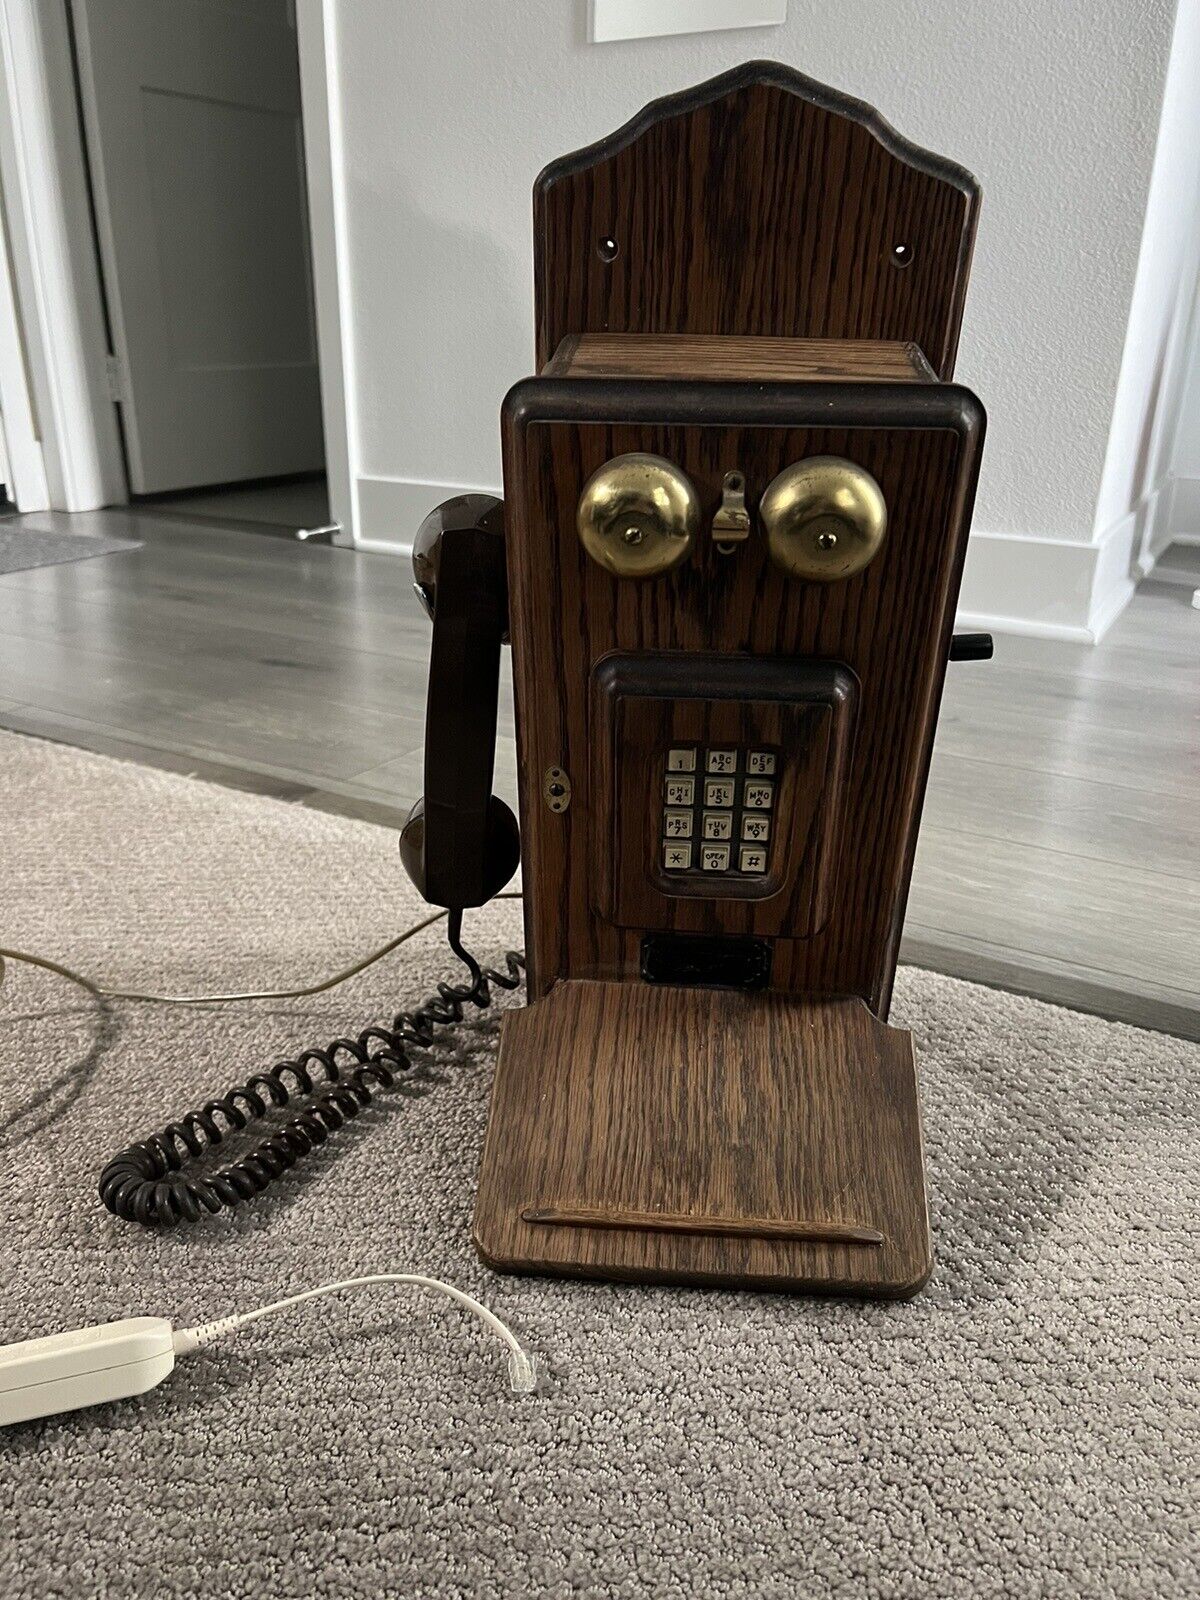 VTG. Phone Wood Box Wall Mount Antique Telephone With Buttons Oak/Gold UNTESTED